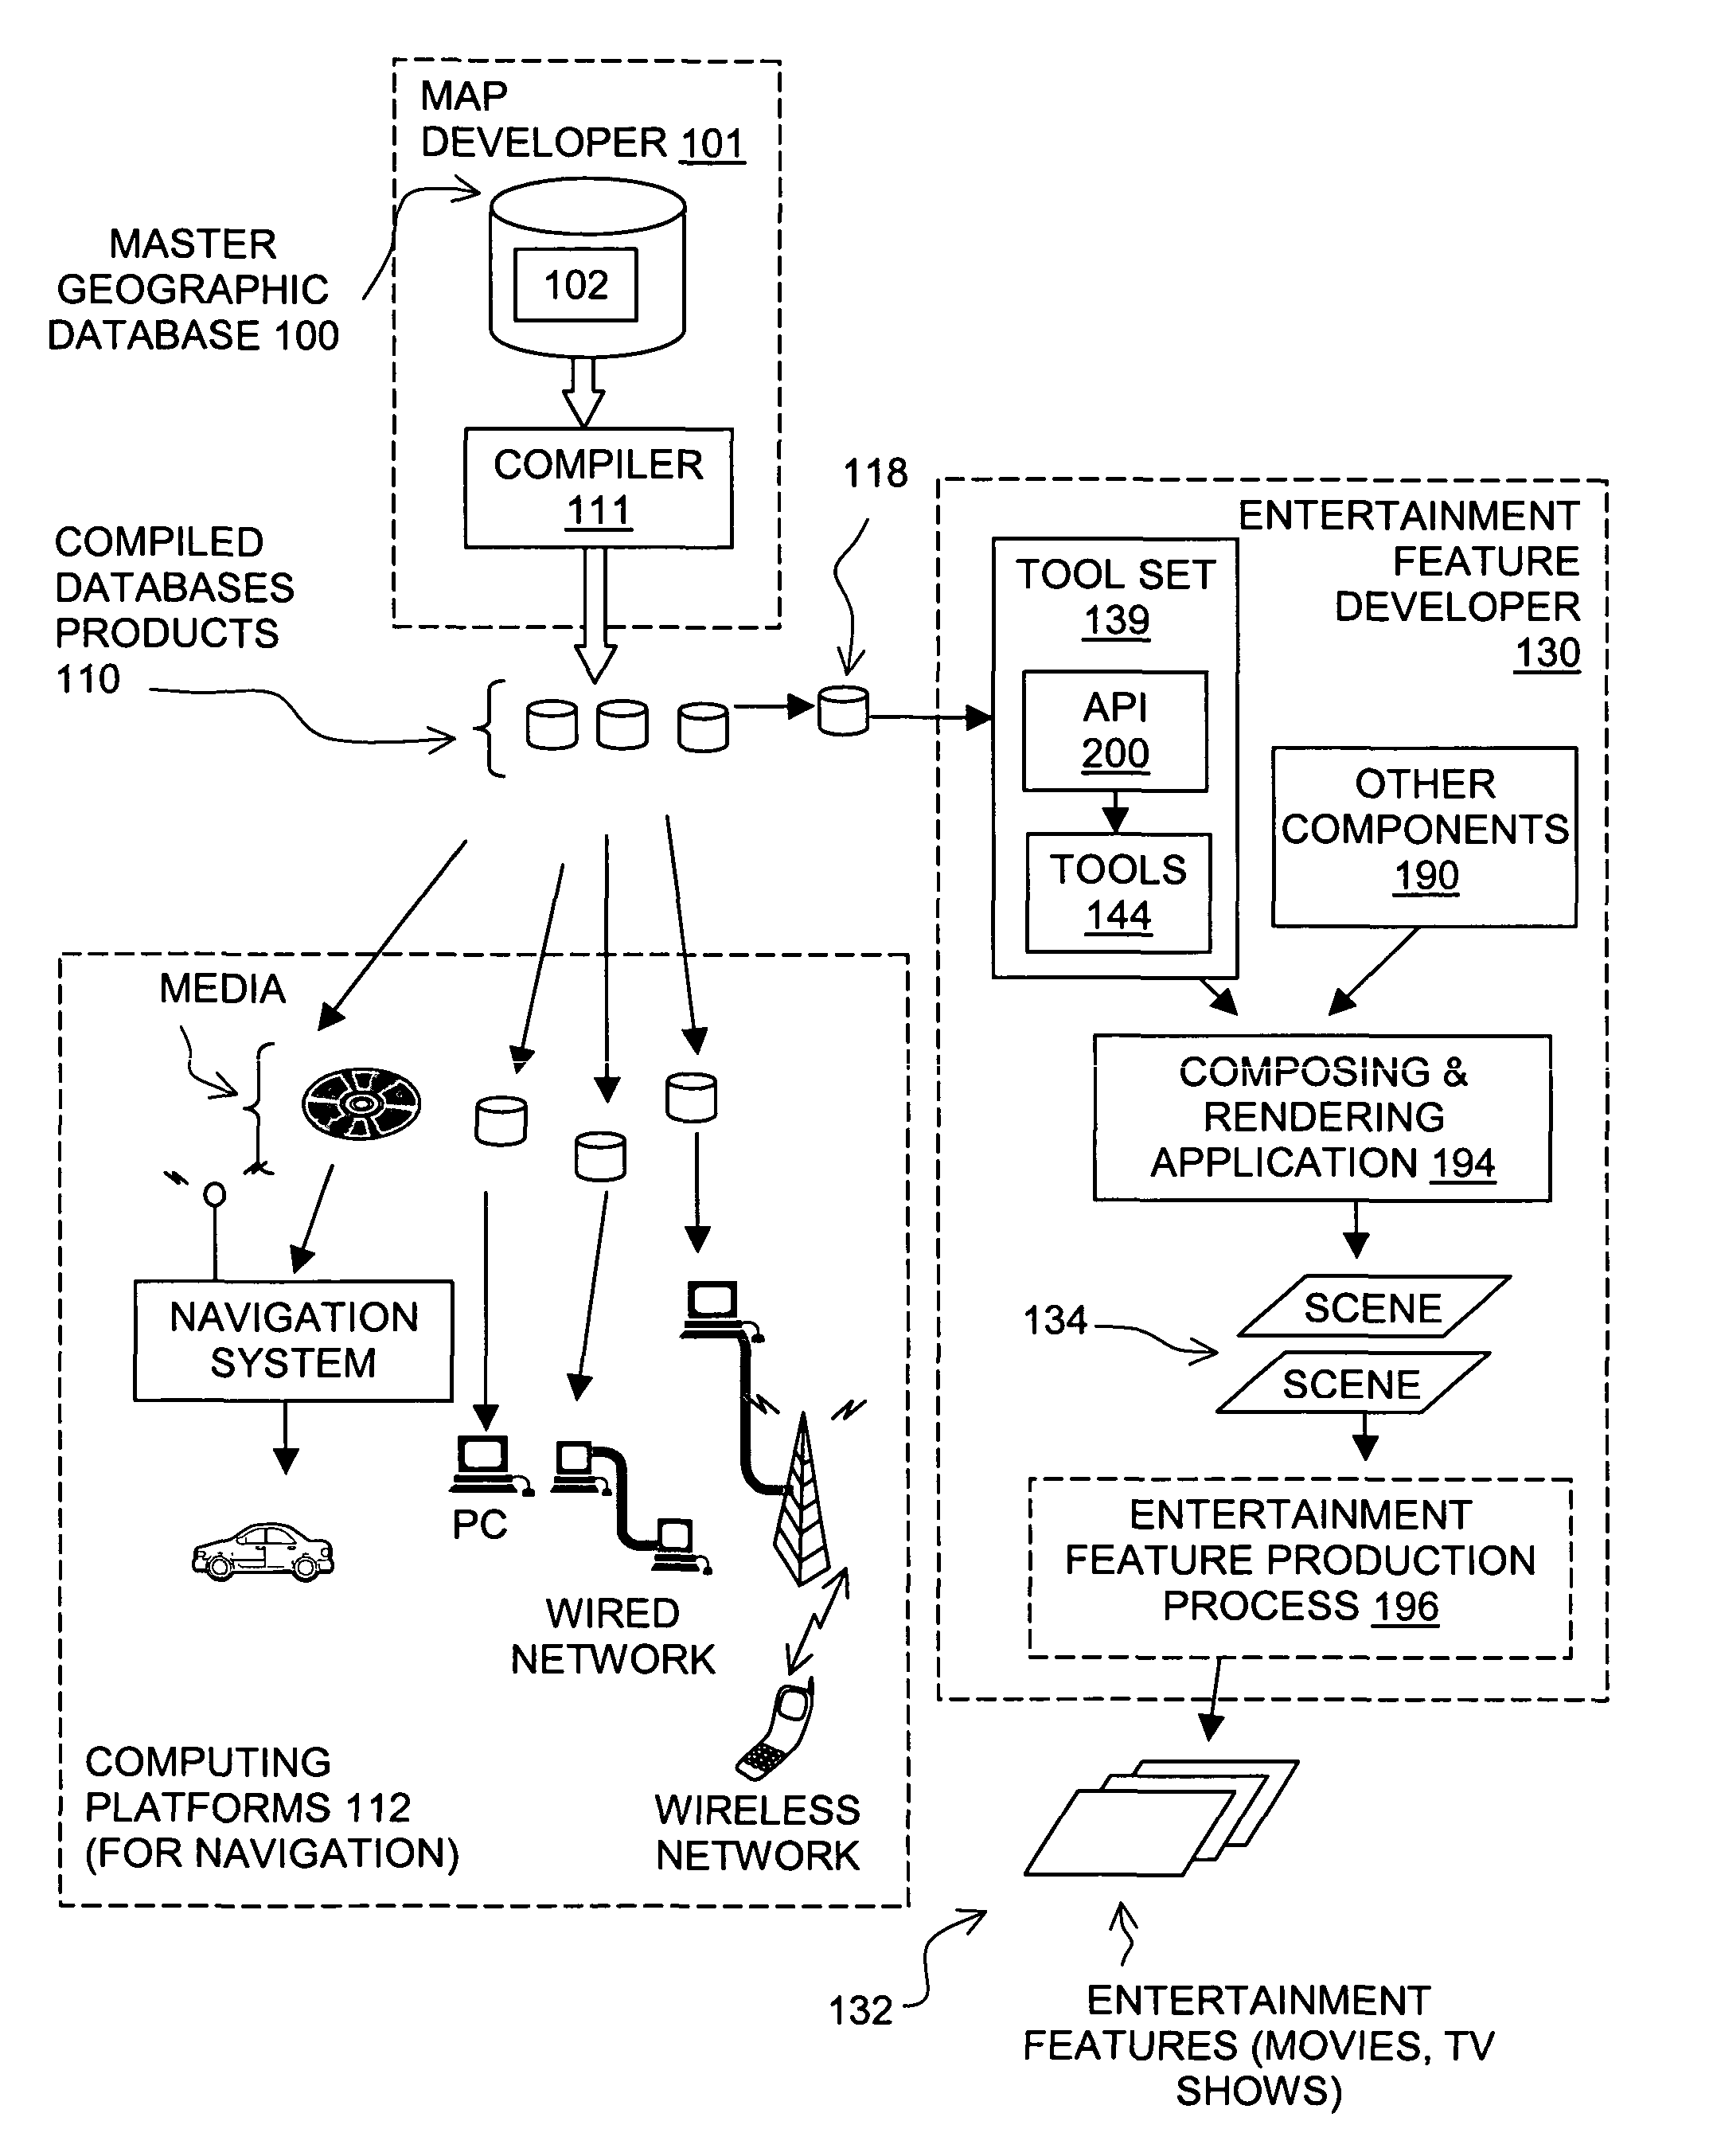 Method and system for using geographic data for developing scenes for entertainment features